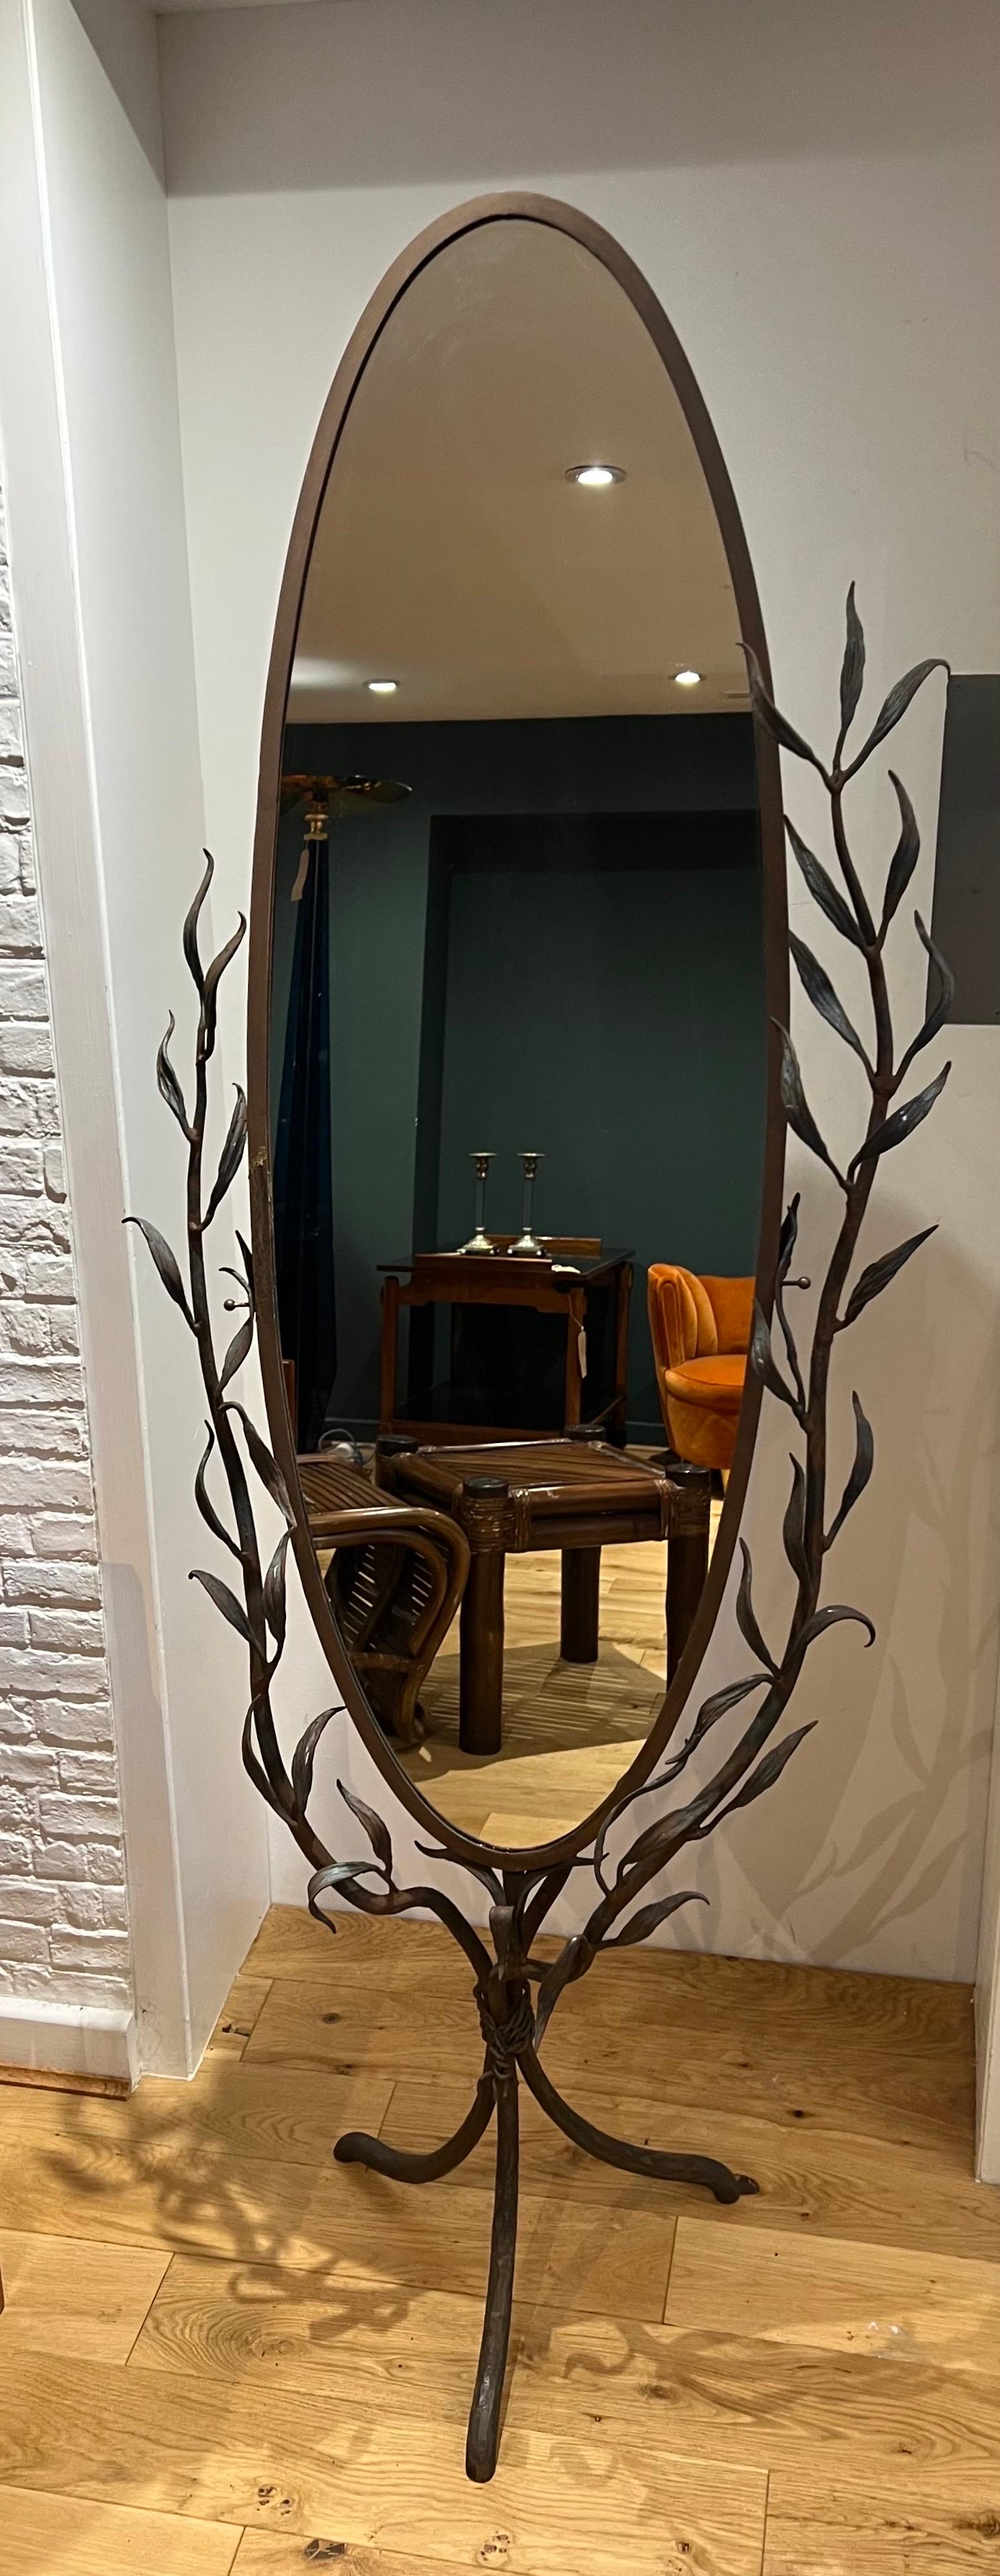 A hand built, unpolished, iron work, free standing vanity mirror with intricate leaf and branch detailing.